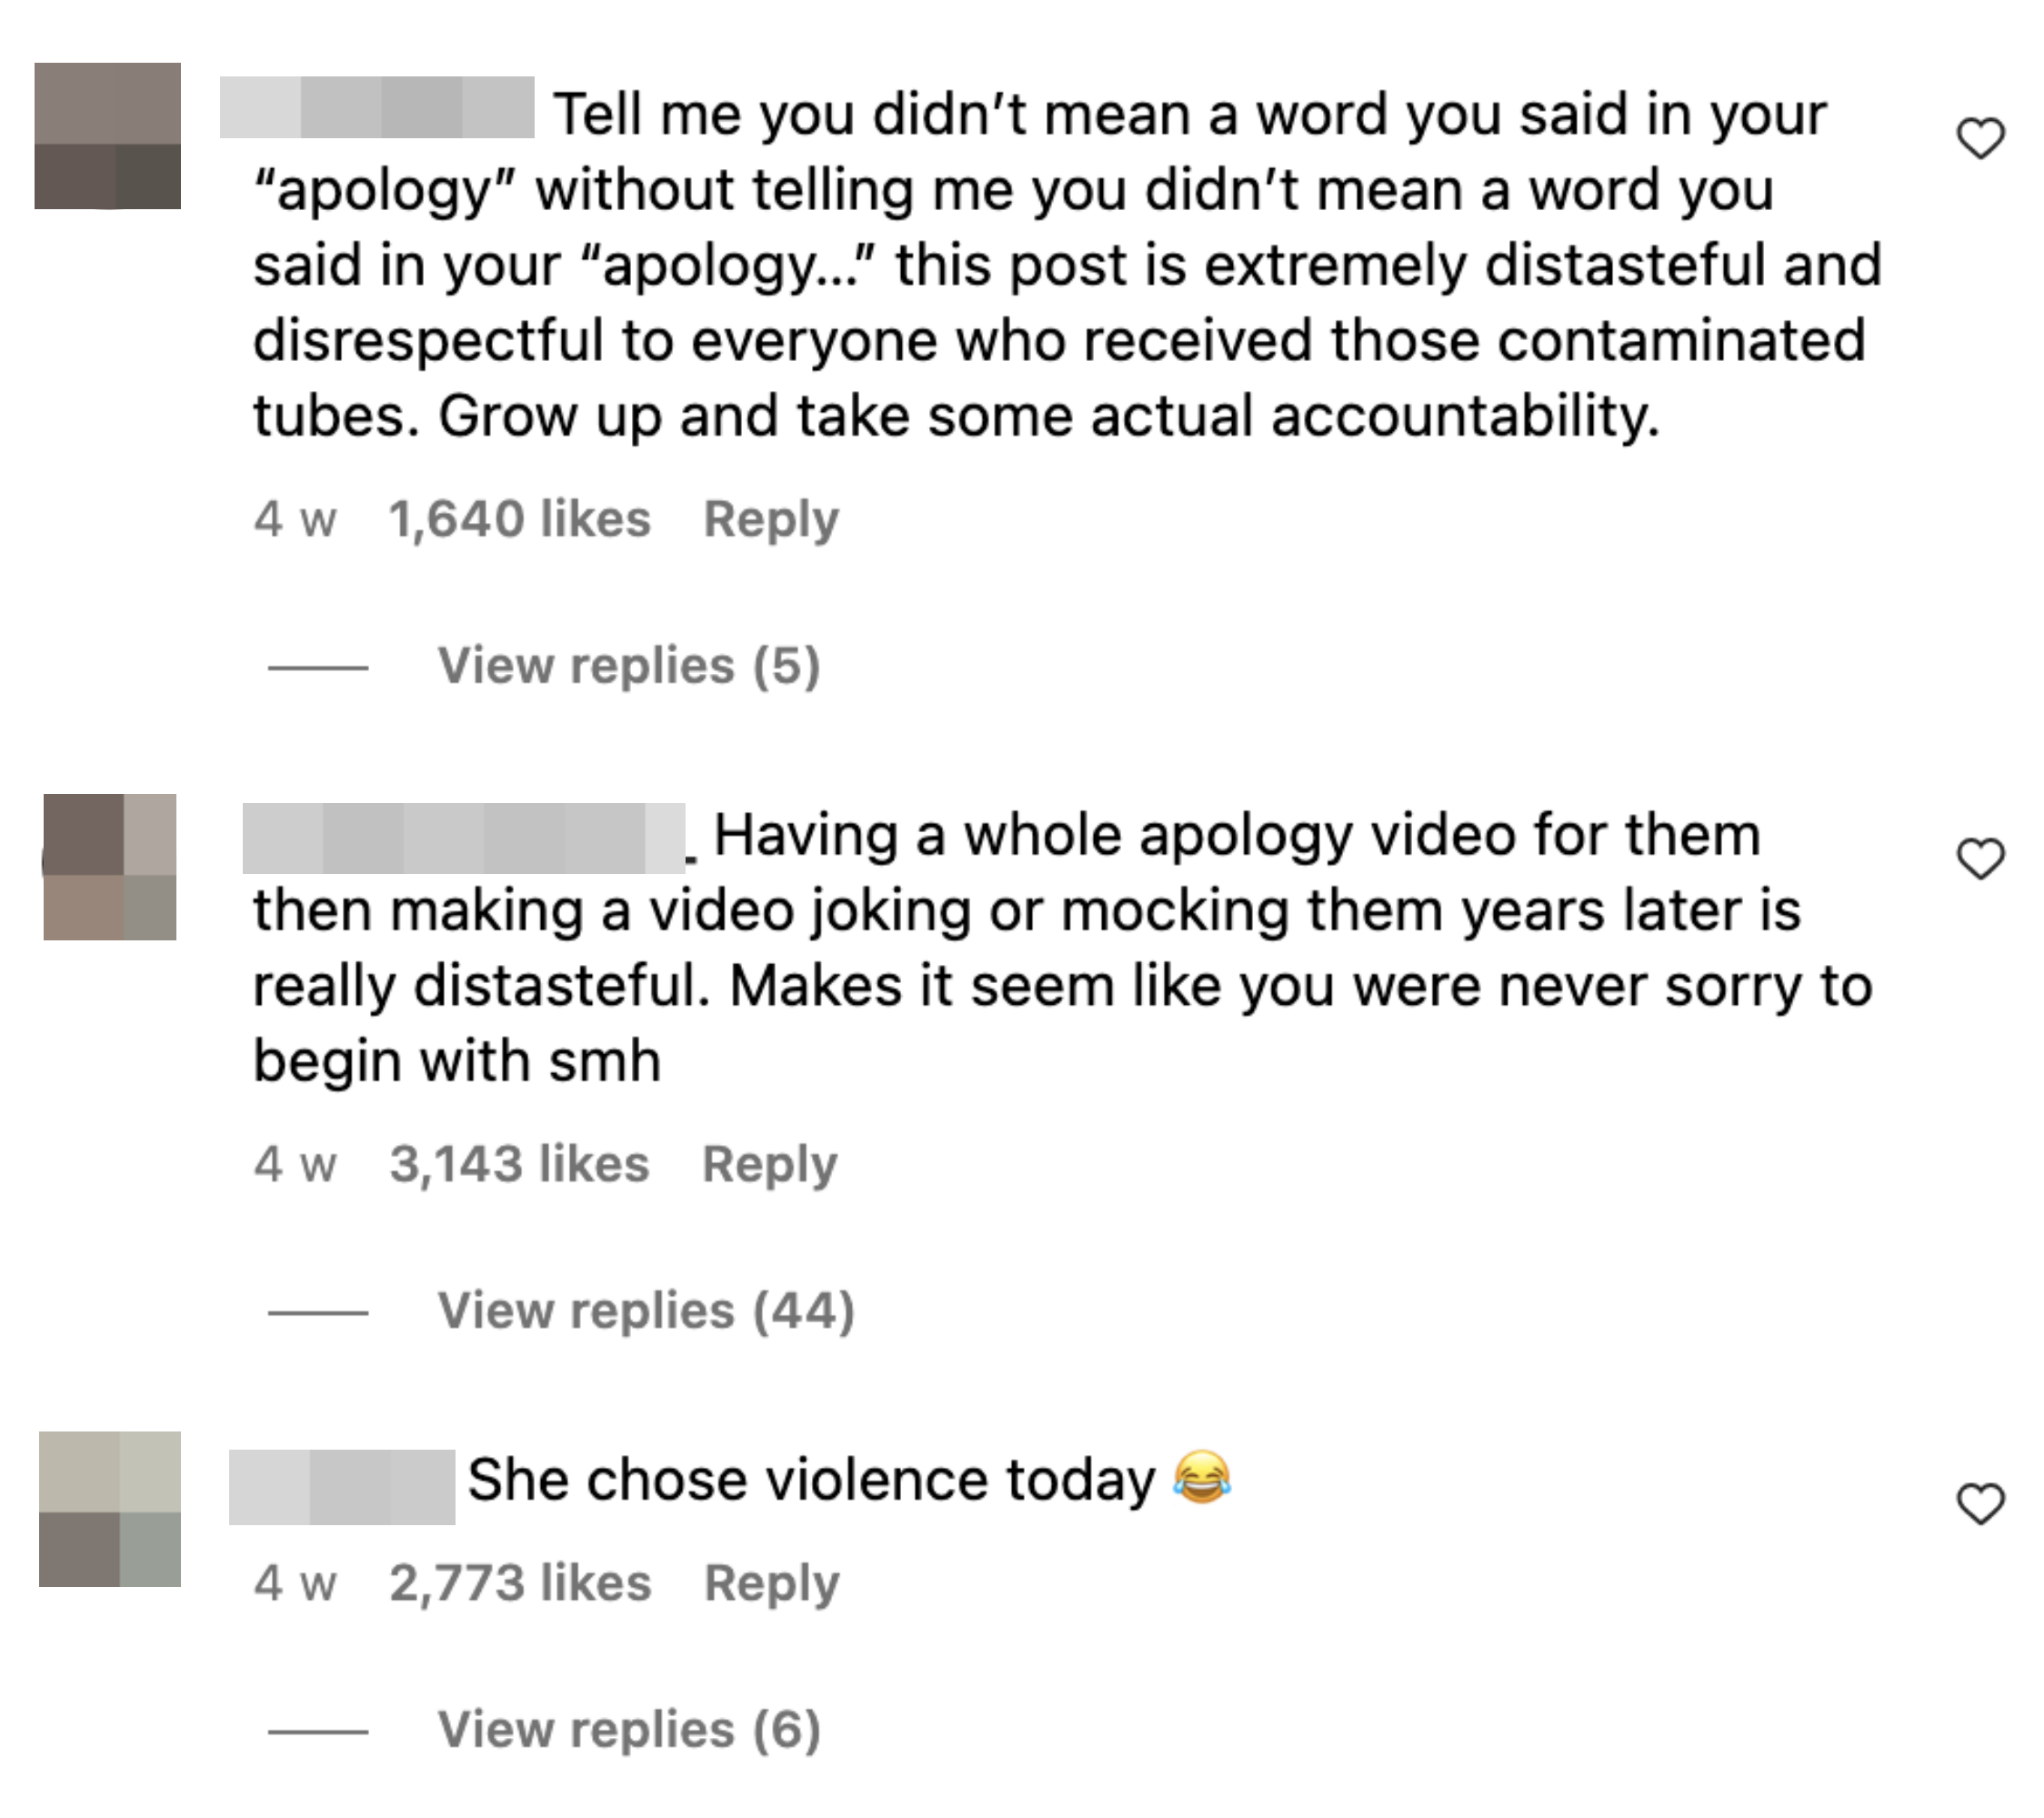 One person commented, &quot;She chose violence today&quot;